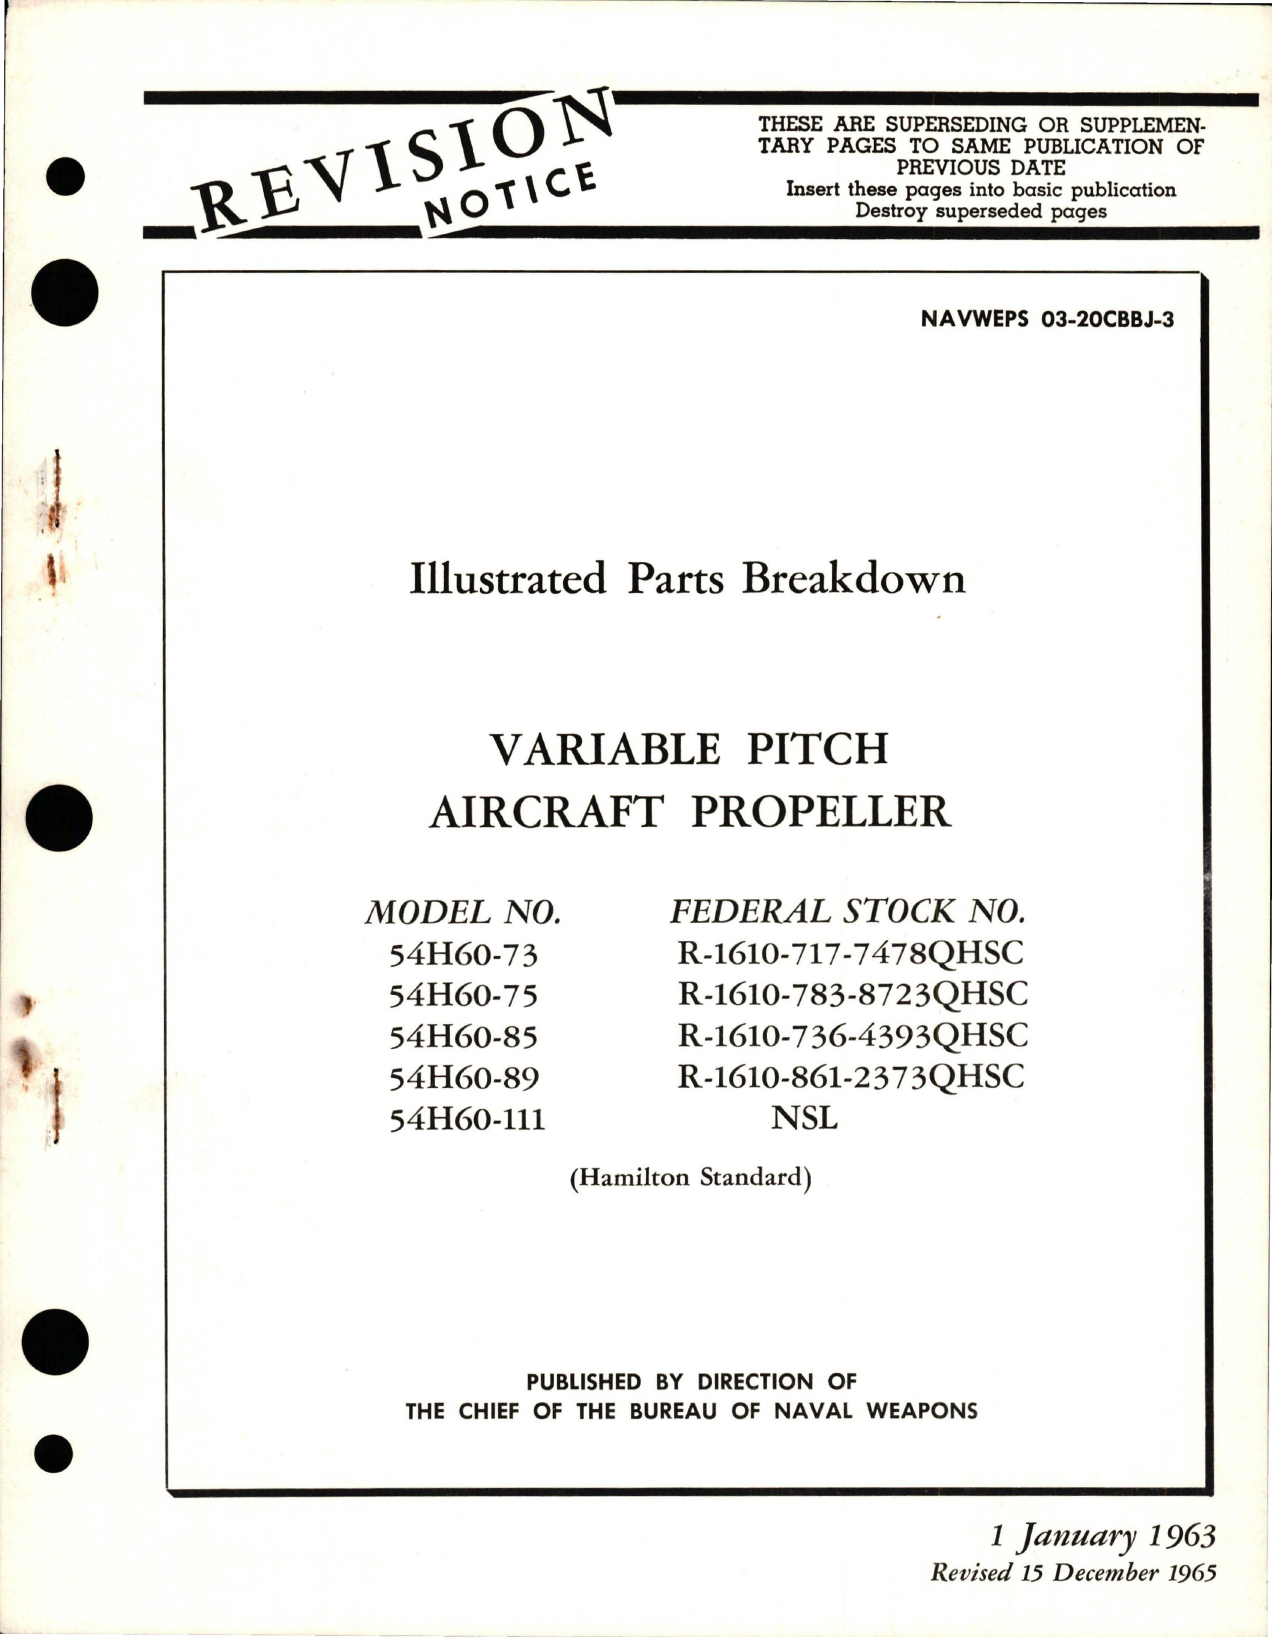 Sample page 1 from AirCorps Library document: Variable Pitch Propeller - Model 54H60-73, 54H60-75, 54H60-85, 54H60-89, and 54H60-111